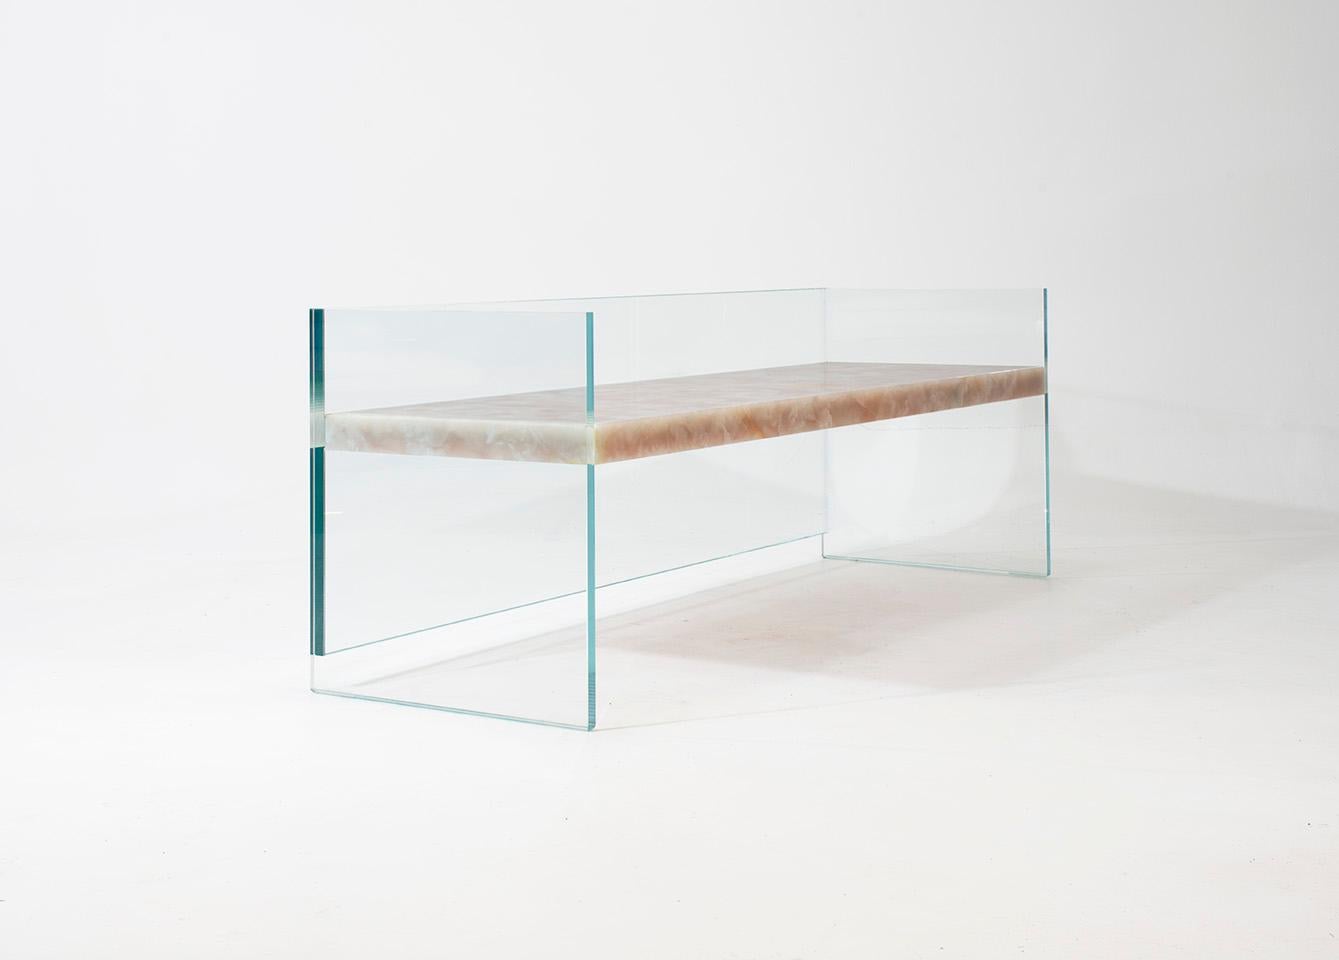 A handcrafted slab of marble or onyx is suspended between 3 panes of glass to create this remarkable bench which emphasizes both the beauty of the stone and the delicate yet deceptive strength of the transparent legs. Every slab is structured by